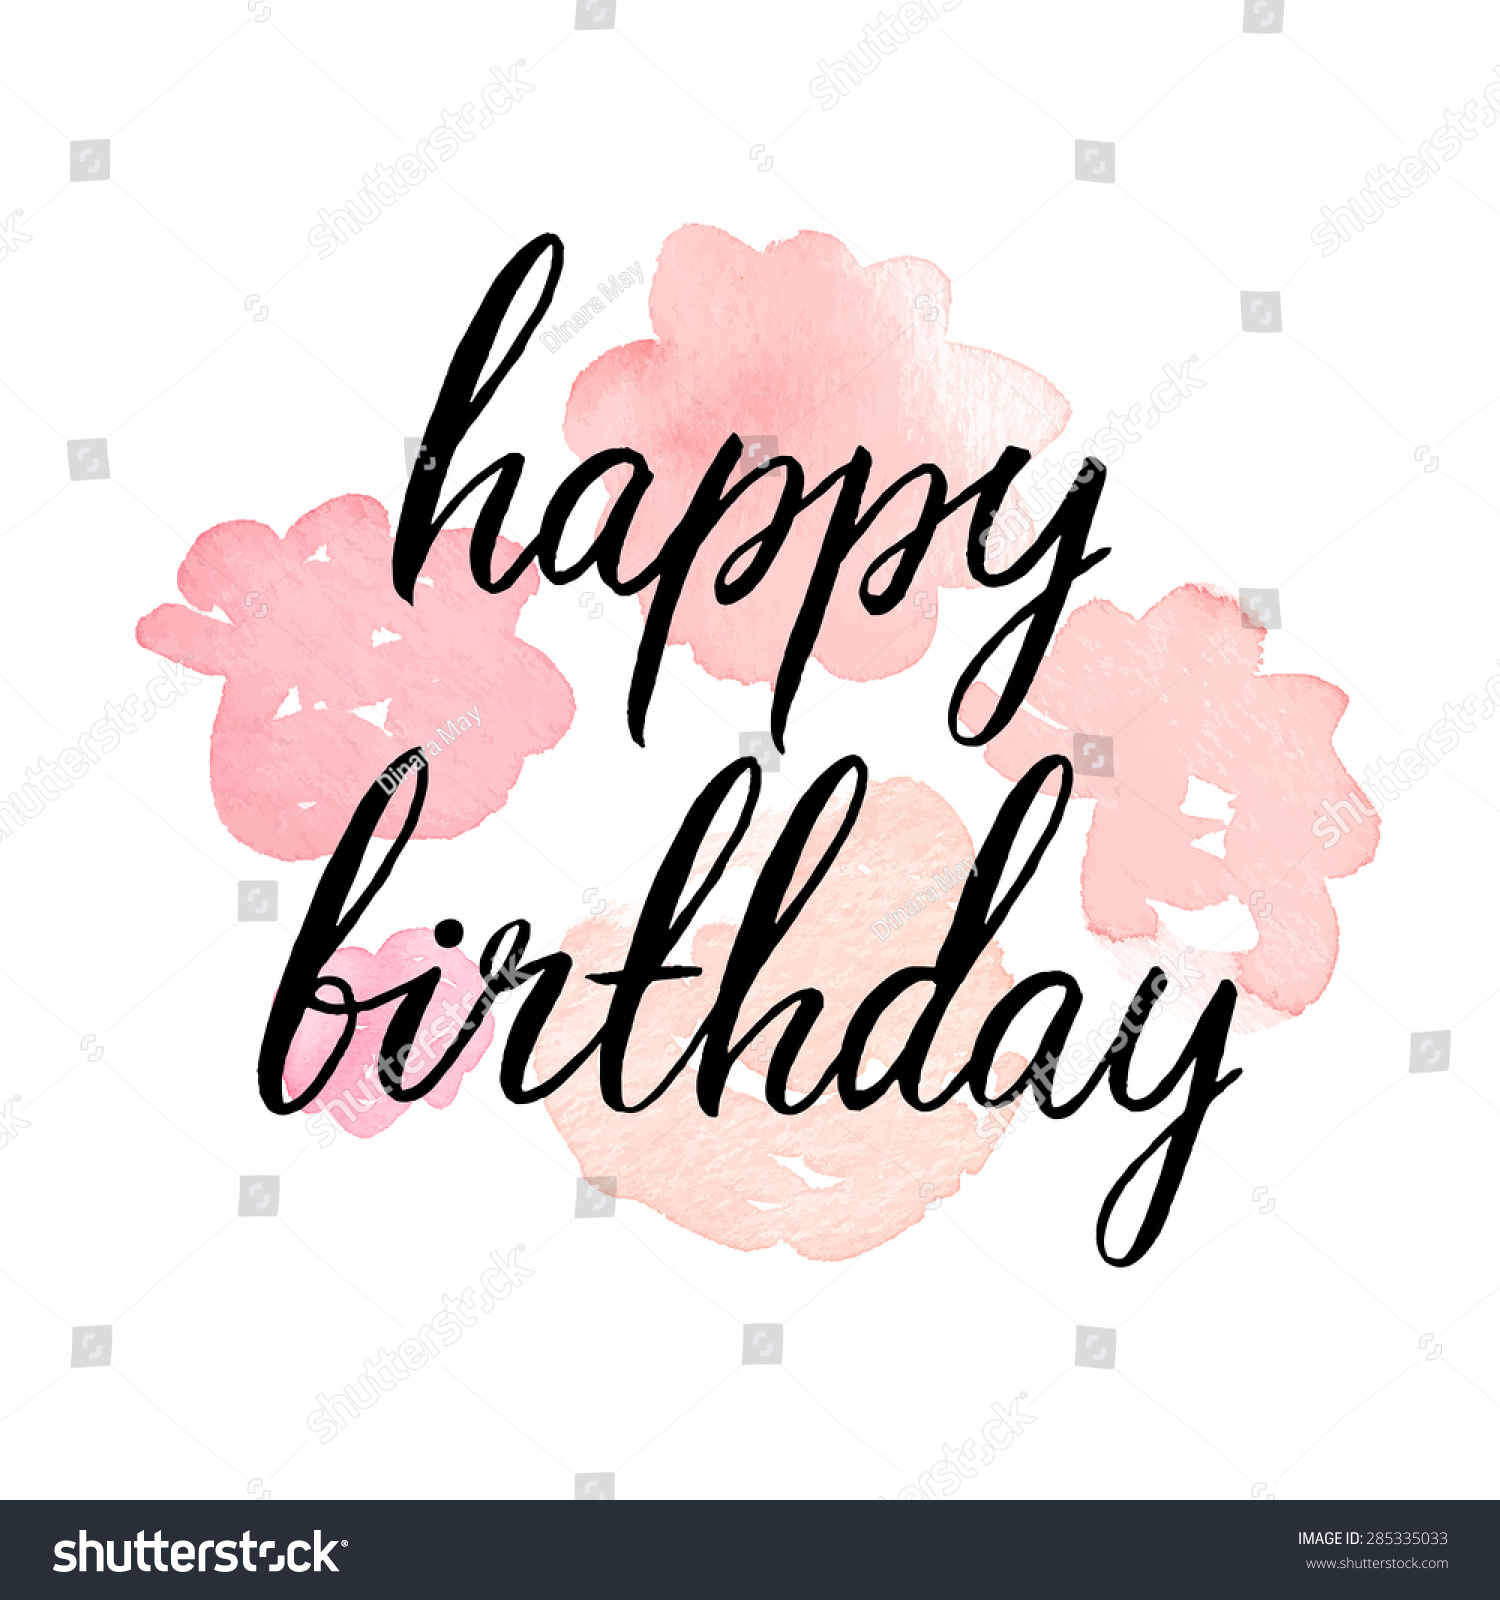 Happy Birthday Card Ink Hand Lettering Stock Vector Royalty Free 285335033 Each day is a beautiful gift. https www shutterstock com image vector happy birthday card ink hand lettering 285335033